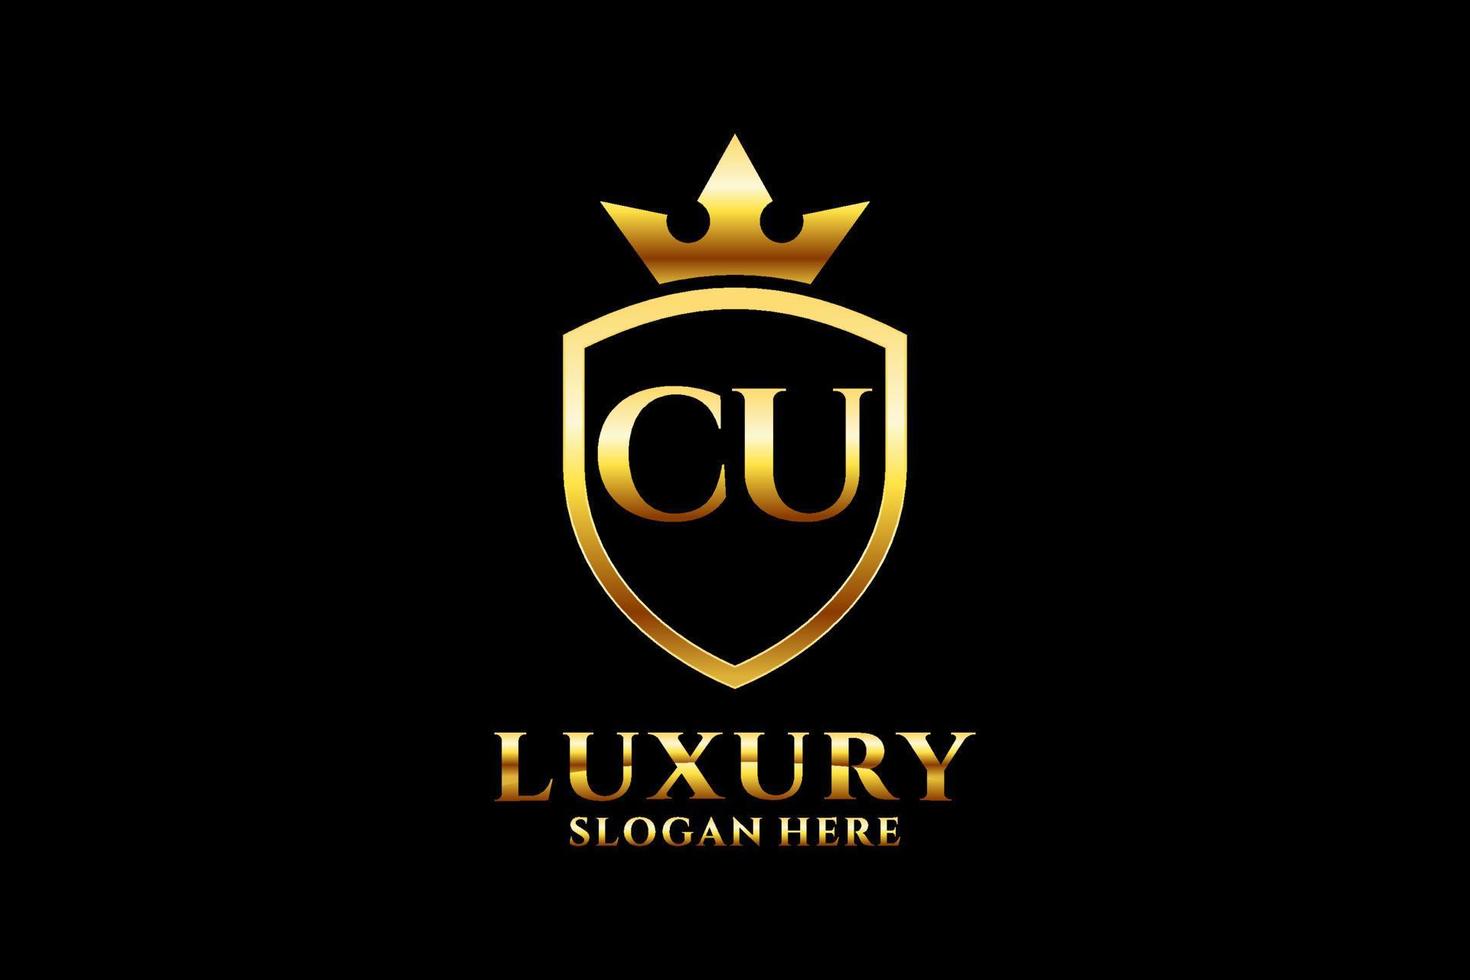 initial CU elegant luxury monogram logo or badge template with scrolls and royal crown - perfect for luxurious branding projects vector